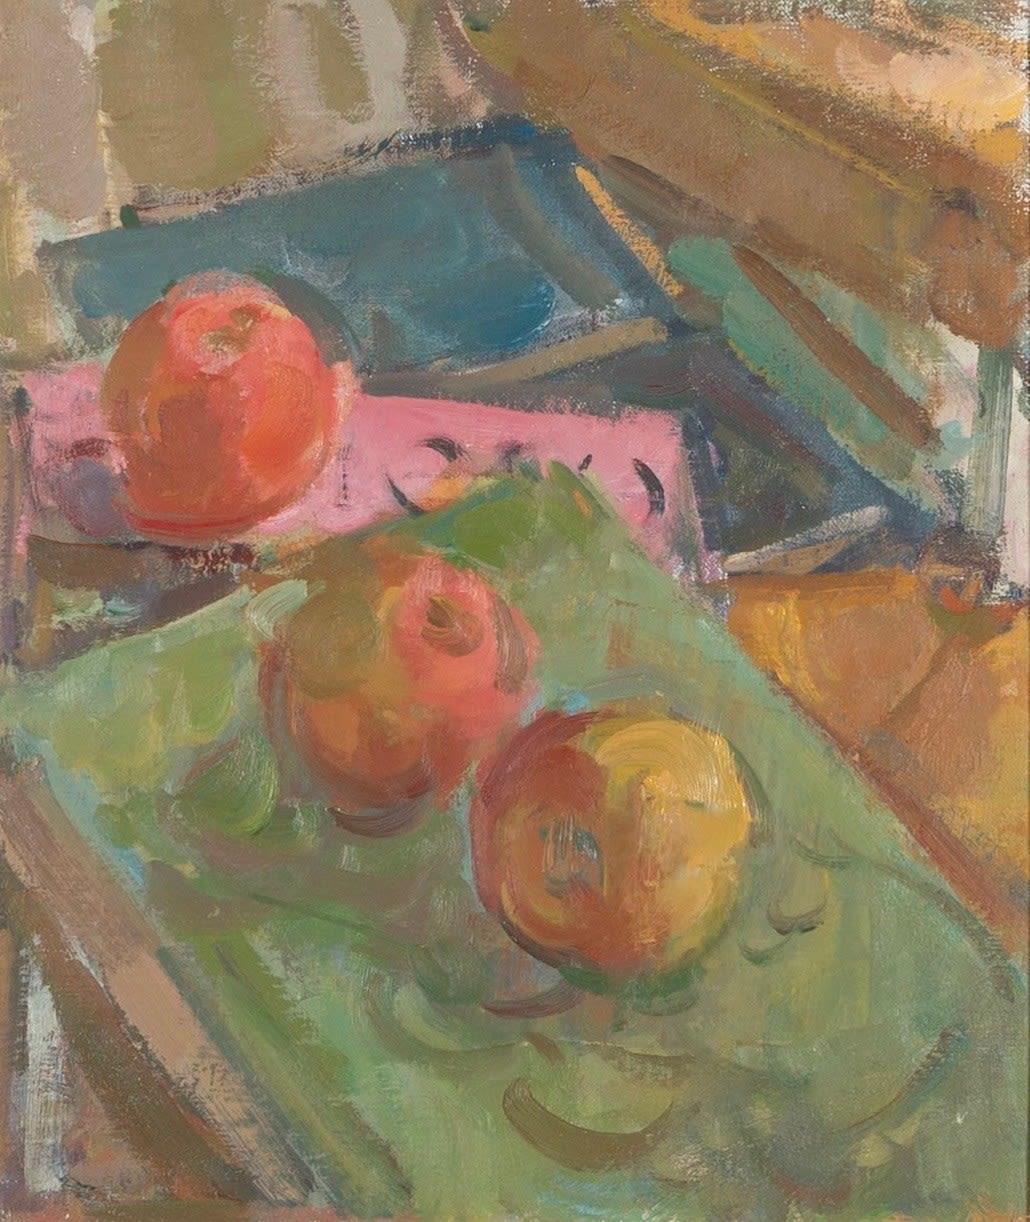 Still life, Apples and Books Painting by Martin Yeoman B. 1953, 2023

Additional information:
Medium: Oil on canvas
Dimensions: 34 x 29 cm
13 3/8 x 11 3/8 in

Martin Yeoman was born in 1953, and studied with Peter Greenham at the Royal Academy